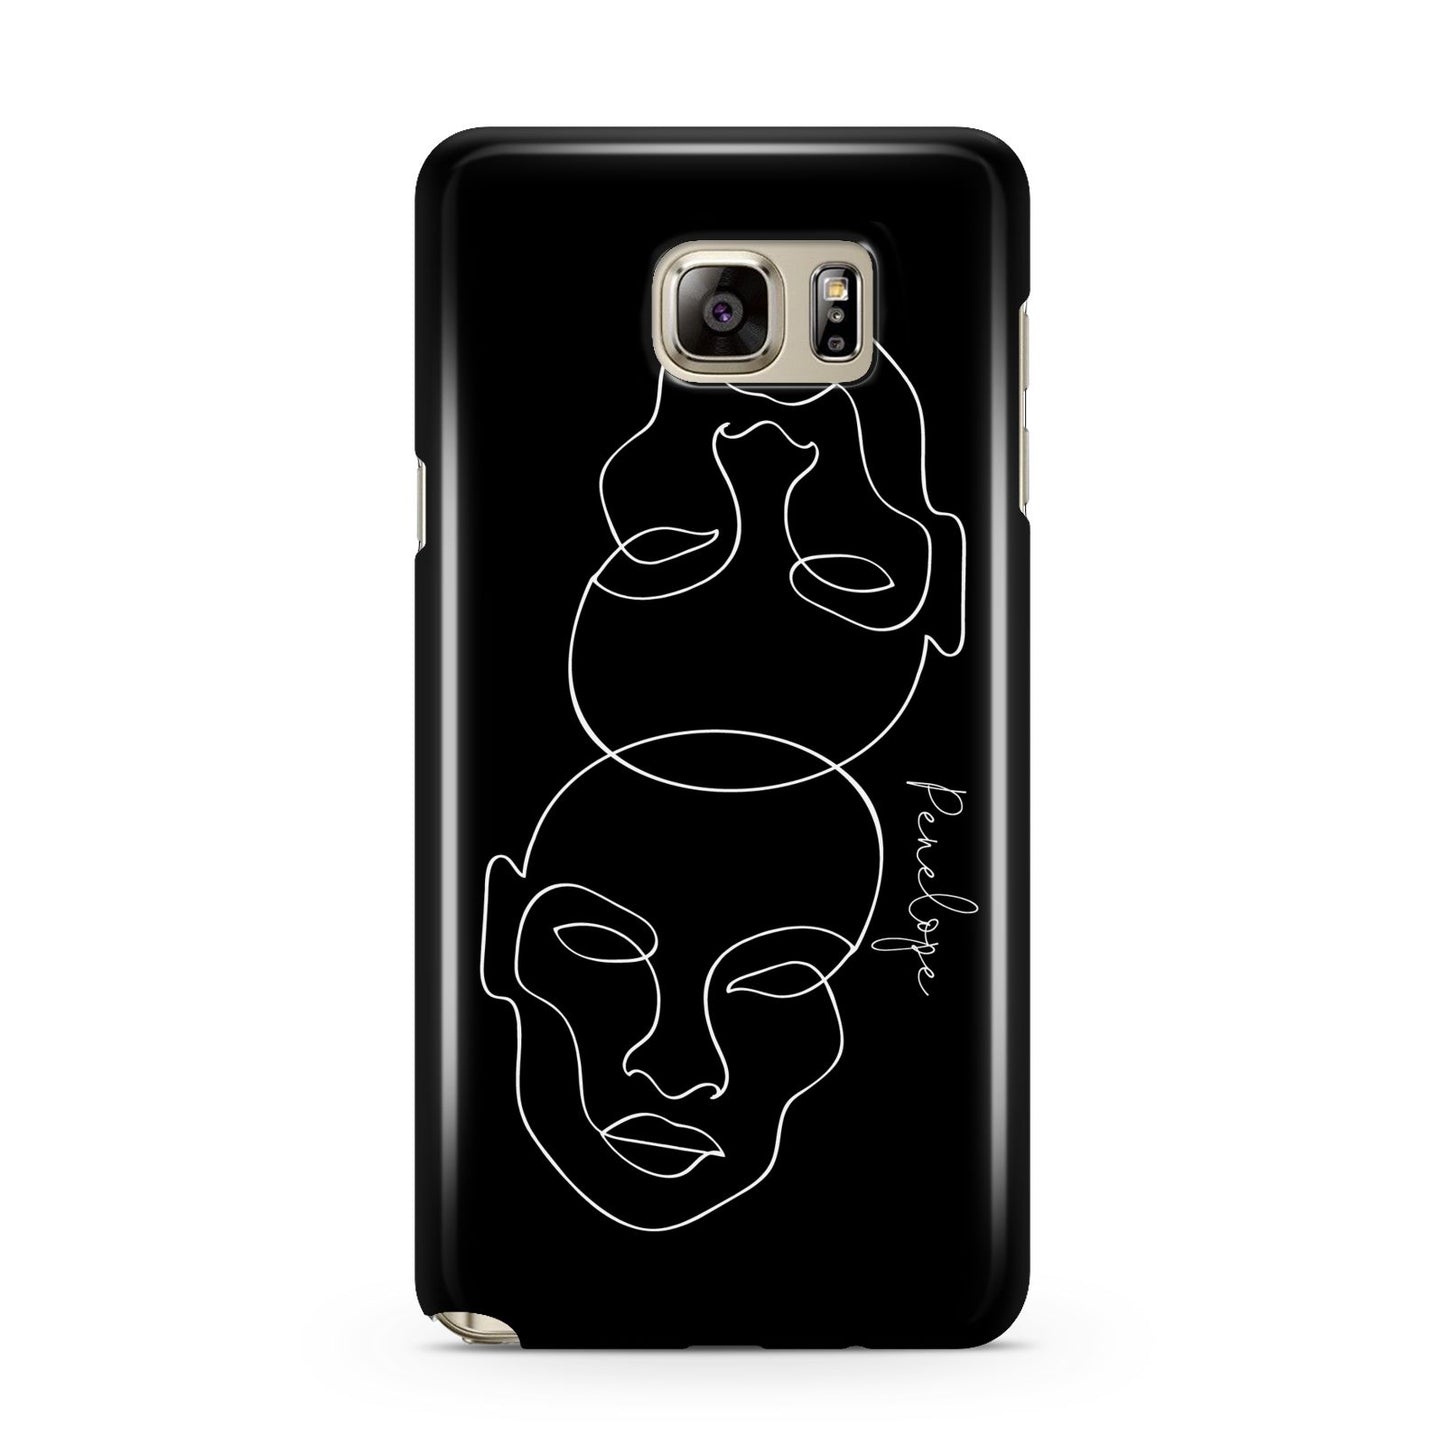 Personalised Abstract Line Art Samsung Galaxy Note 5 Case